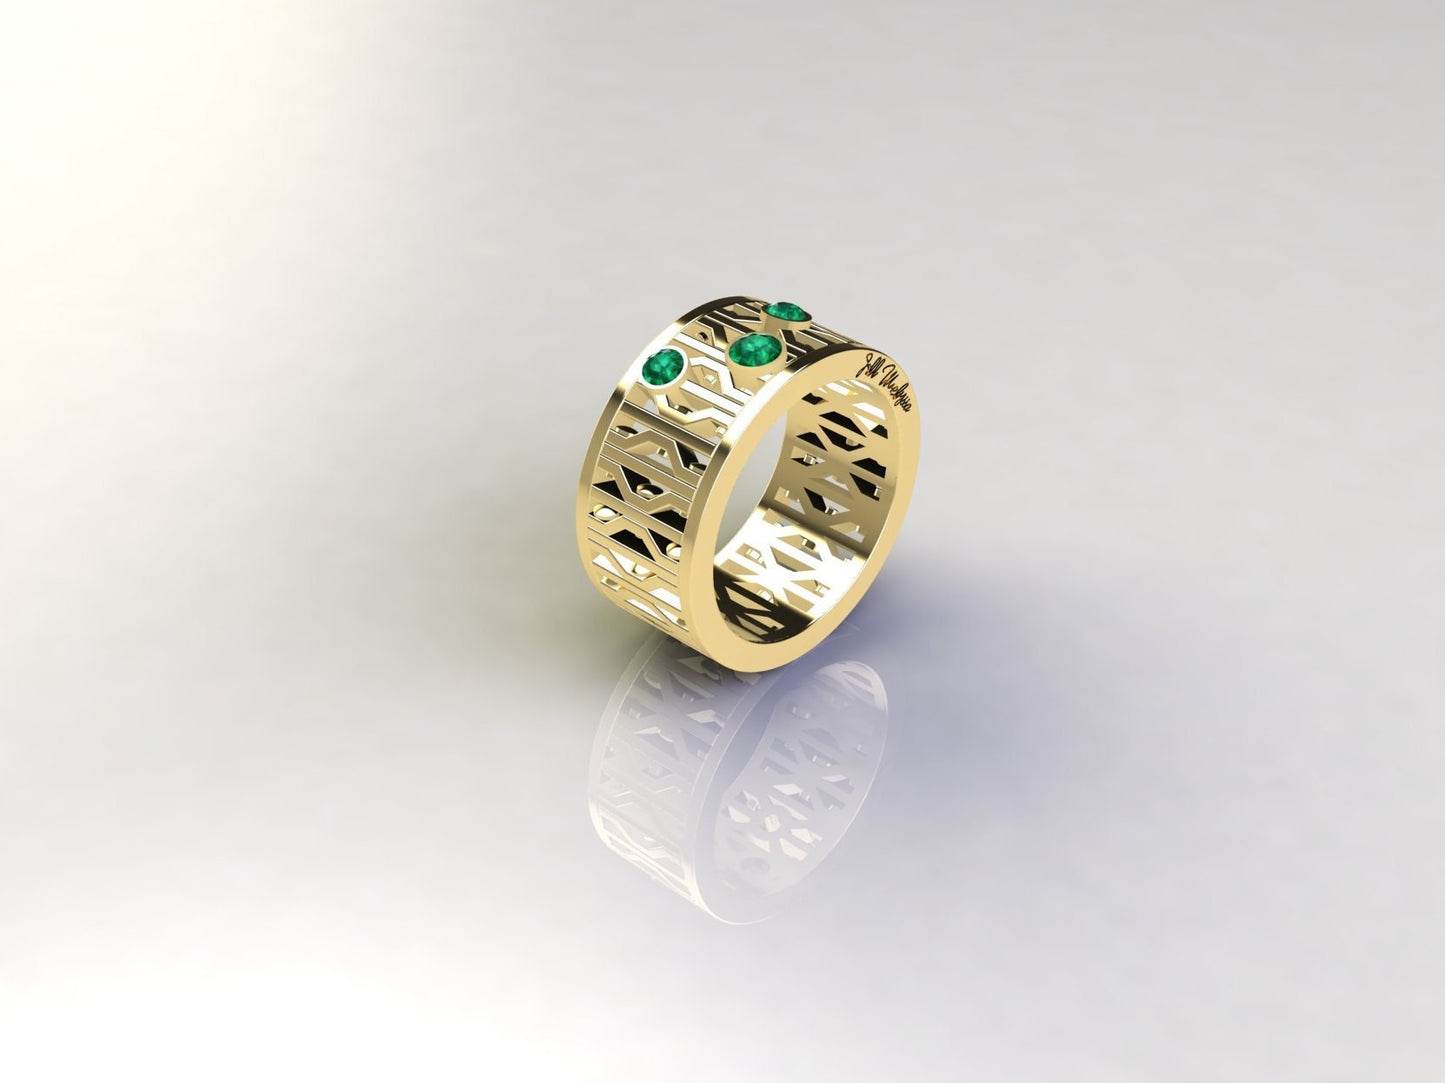 Marilyn Monroe 24k Gold Subway Grate Ring with Stones, 9mm